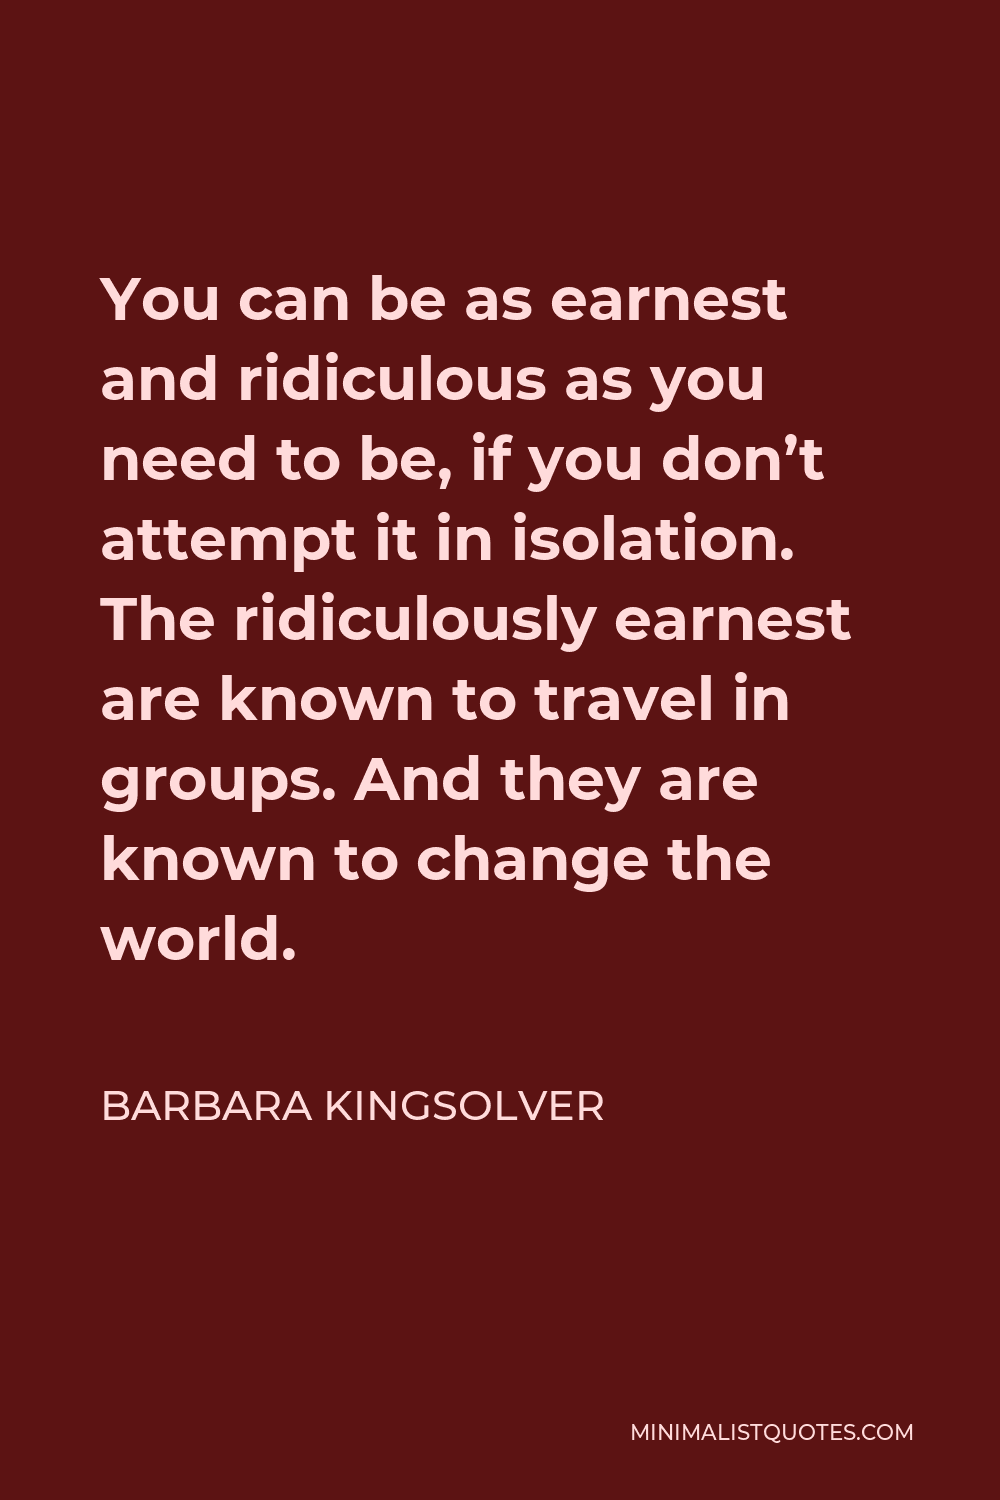 Barbara Kingsolver Quote - You can be as earnest and ridiculous as you need to be, if you don’t attempt it in isolation. The ridiculously earnest are known to travel in groups. And they are known to change the world.